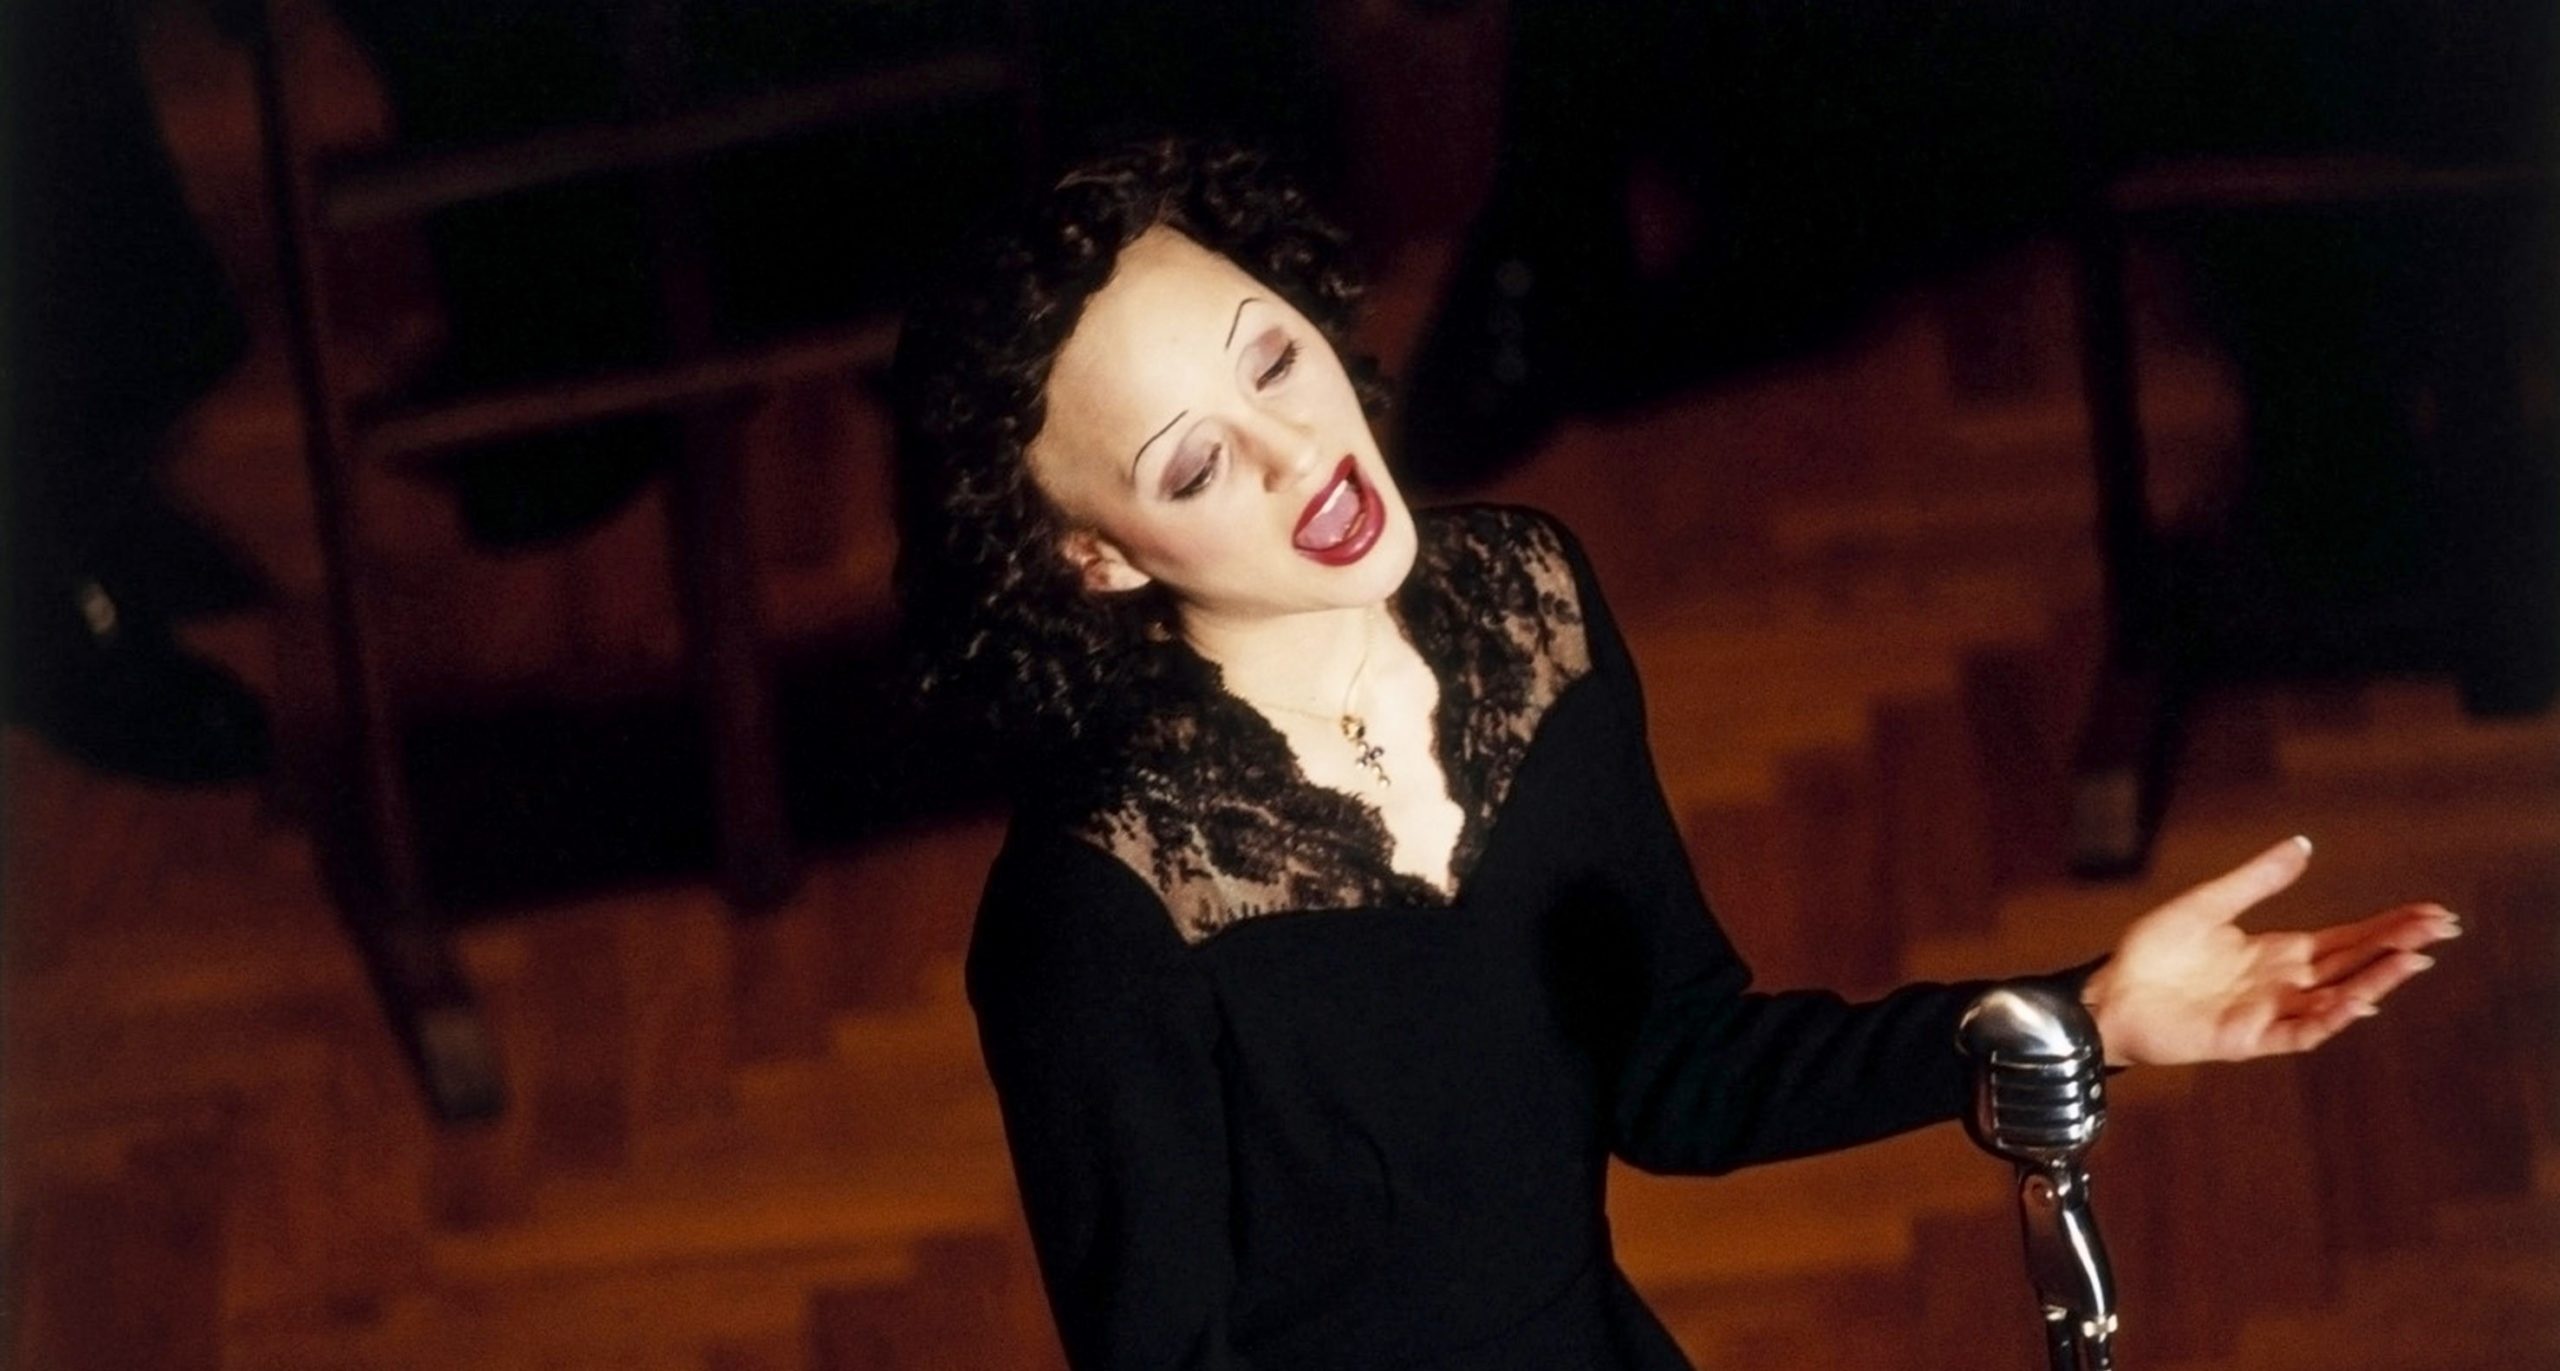 La Vie en Rose: Edith Piaf, One of the country's most widely known international stars. 2560x1380 HD Wallpaper.